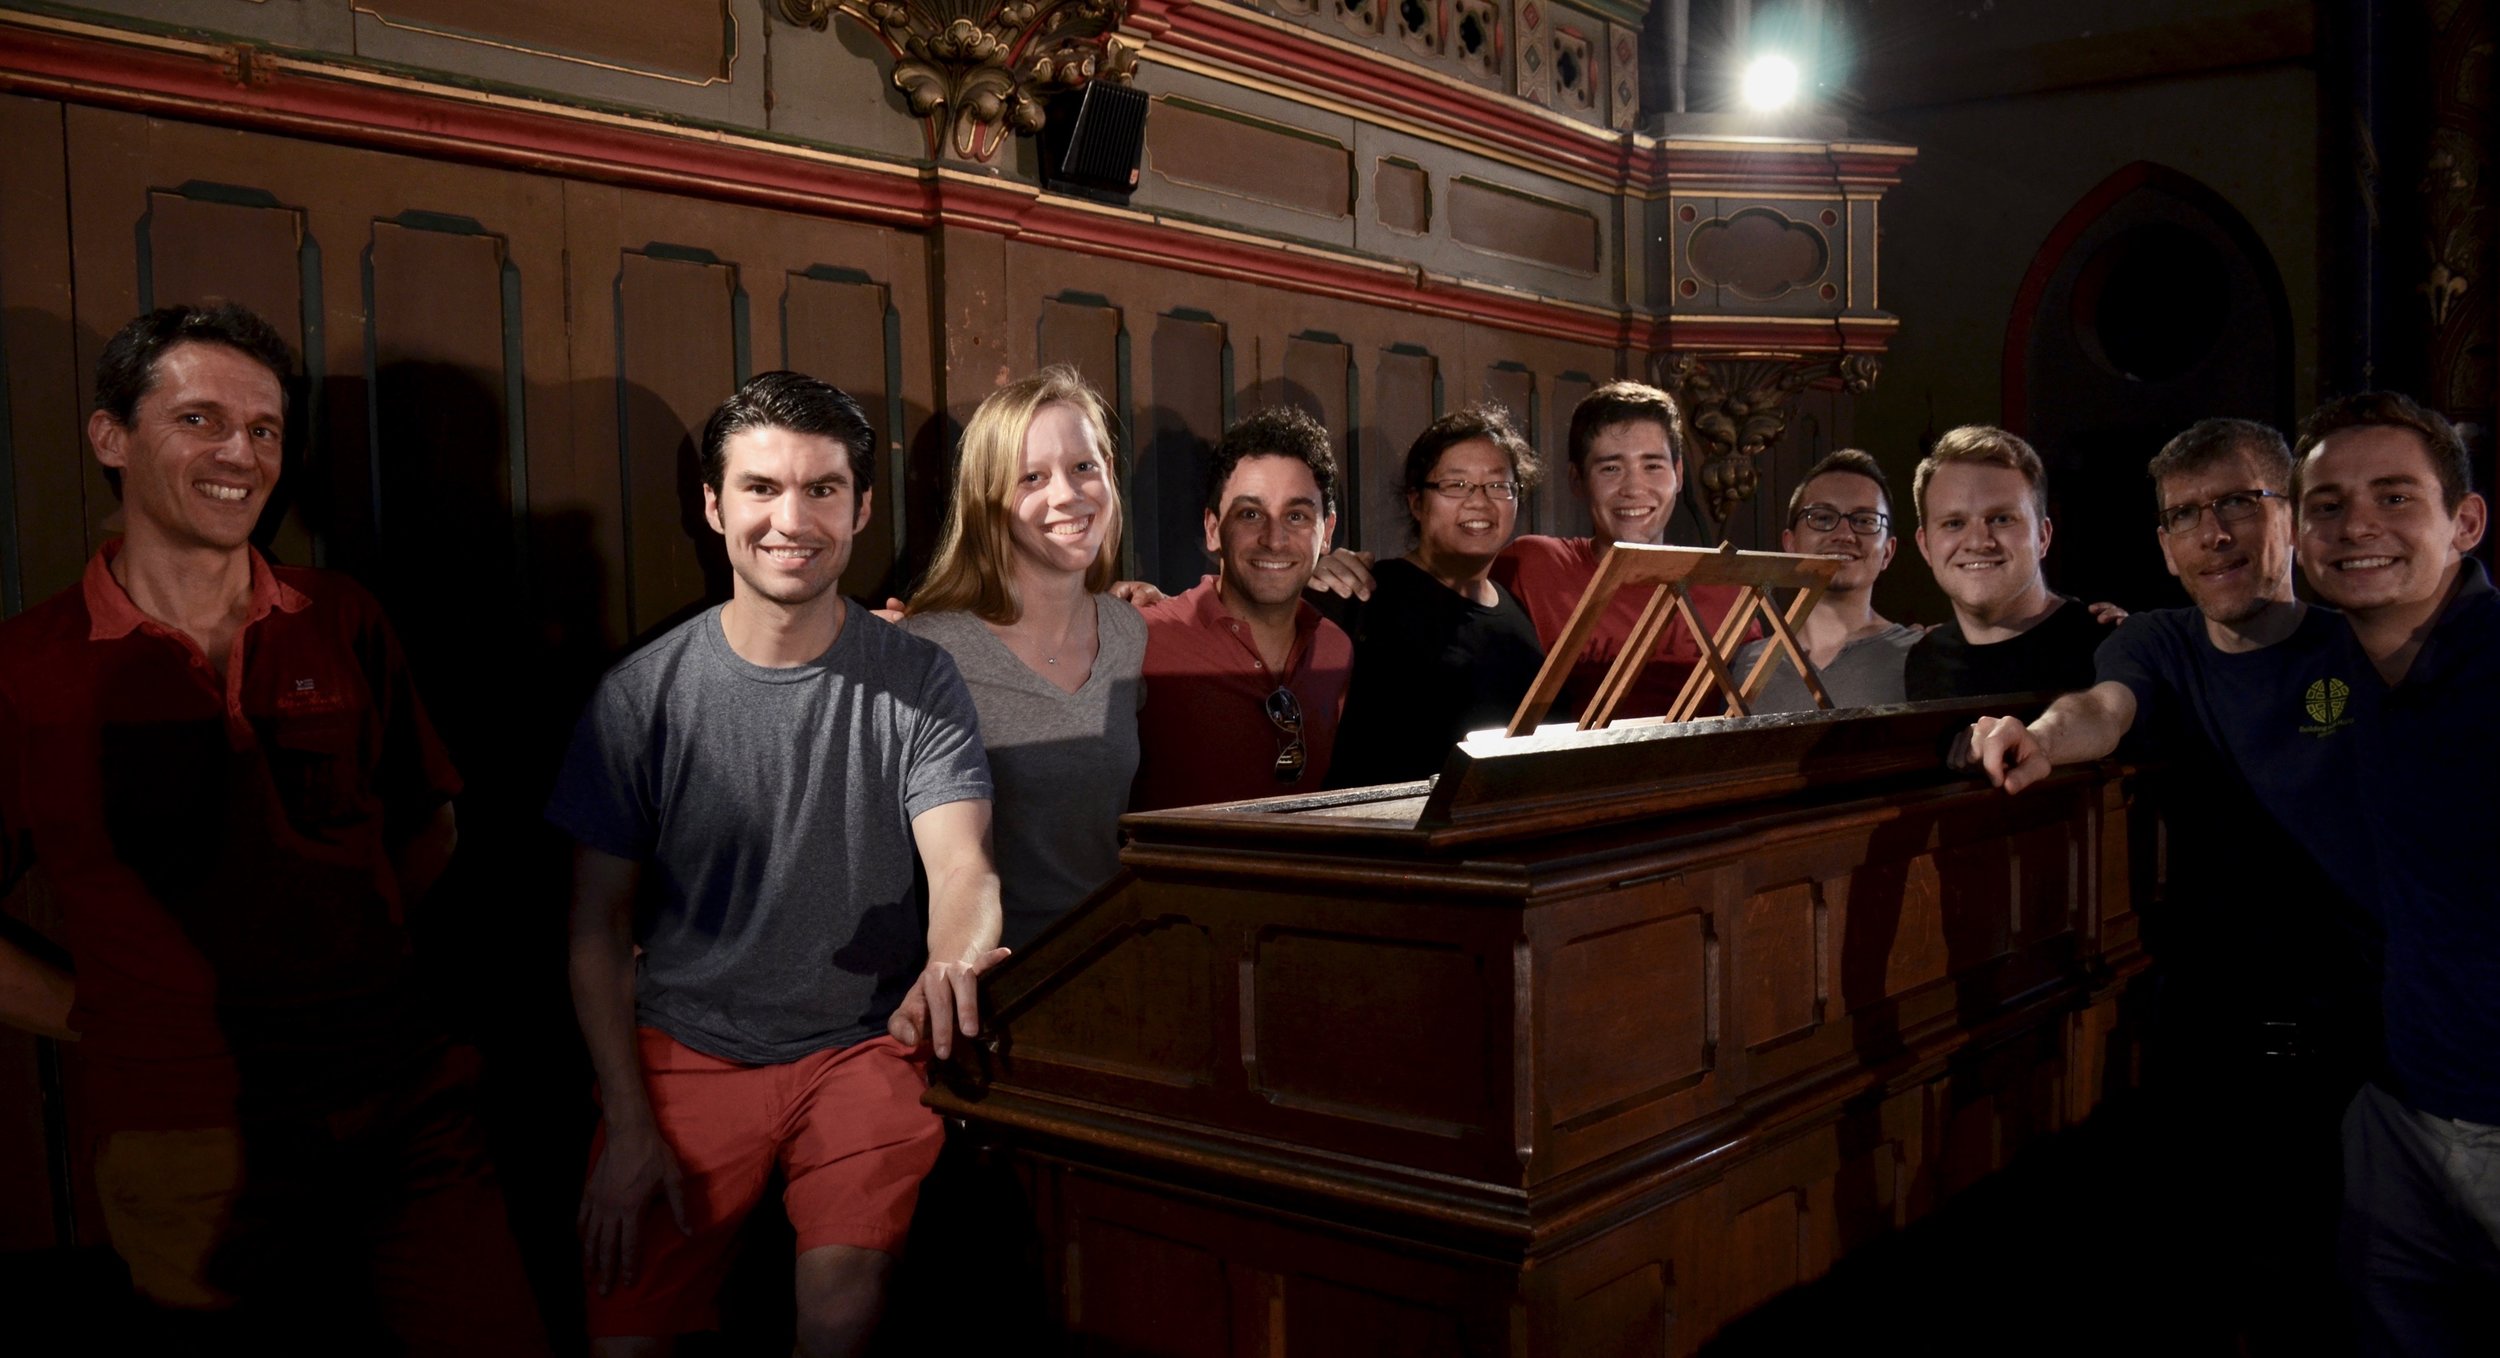 Members of Boston Organ Studio with Yves Rechsteiner, Exec. Dir of Toulouse les Orgues